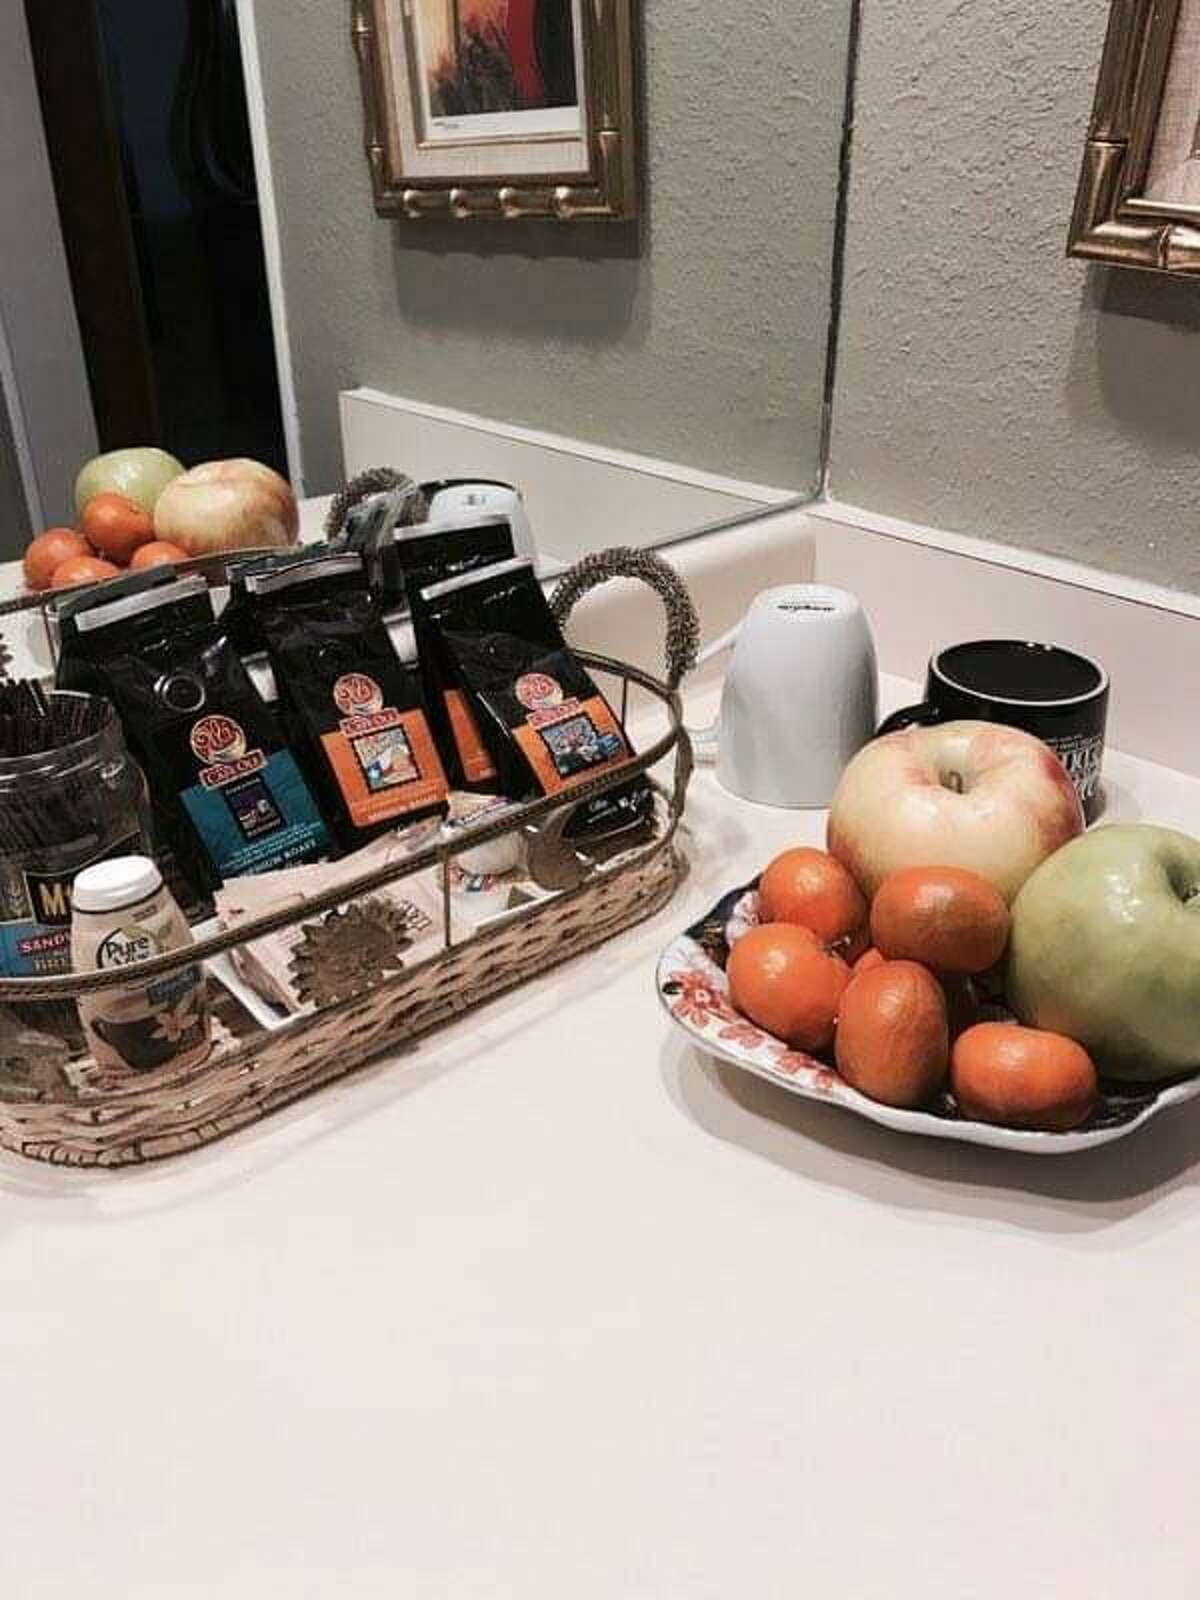 Nothing says homey like a basket containing coffee and fruit like this one that Eileen Pace puts out for guests.